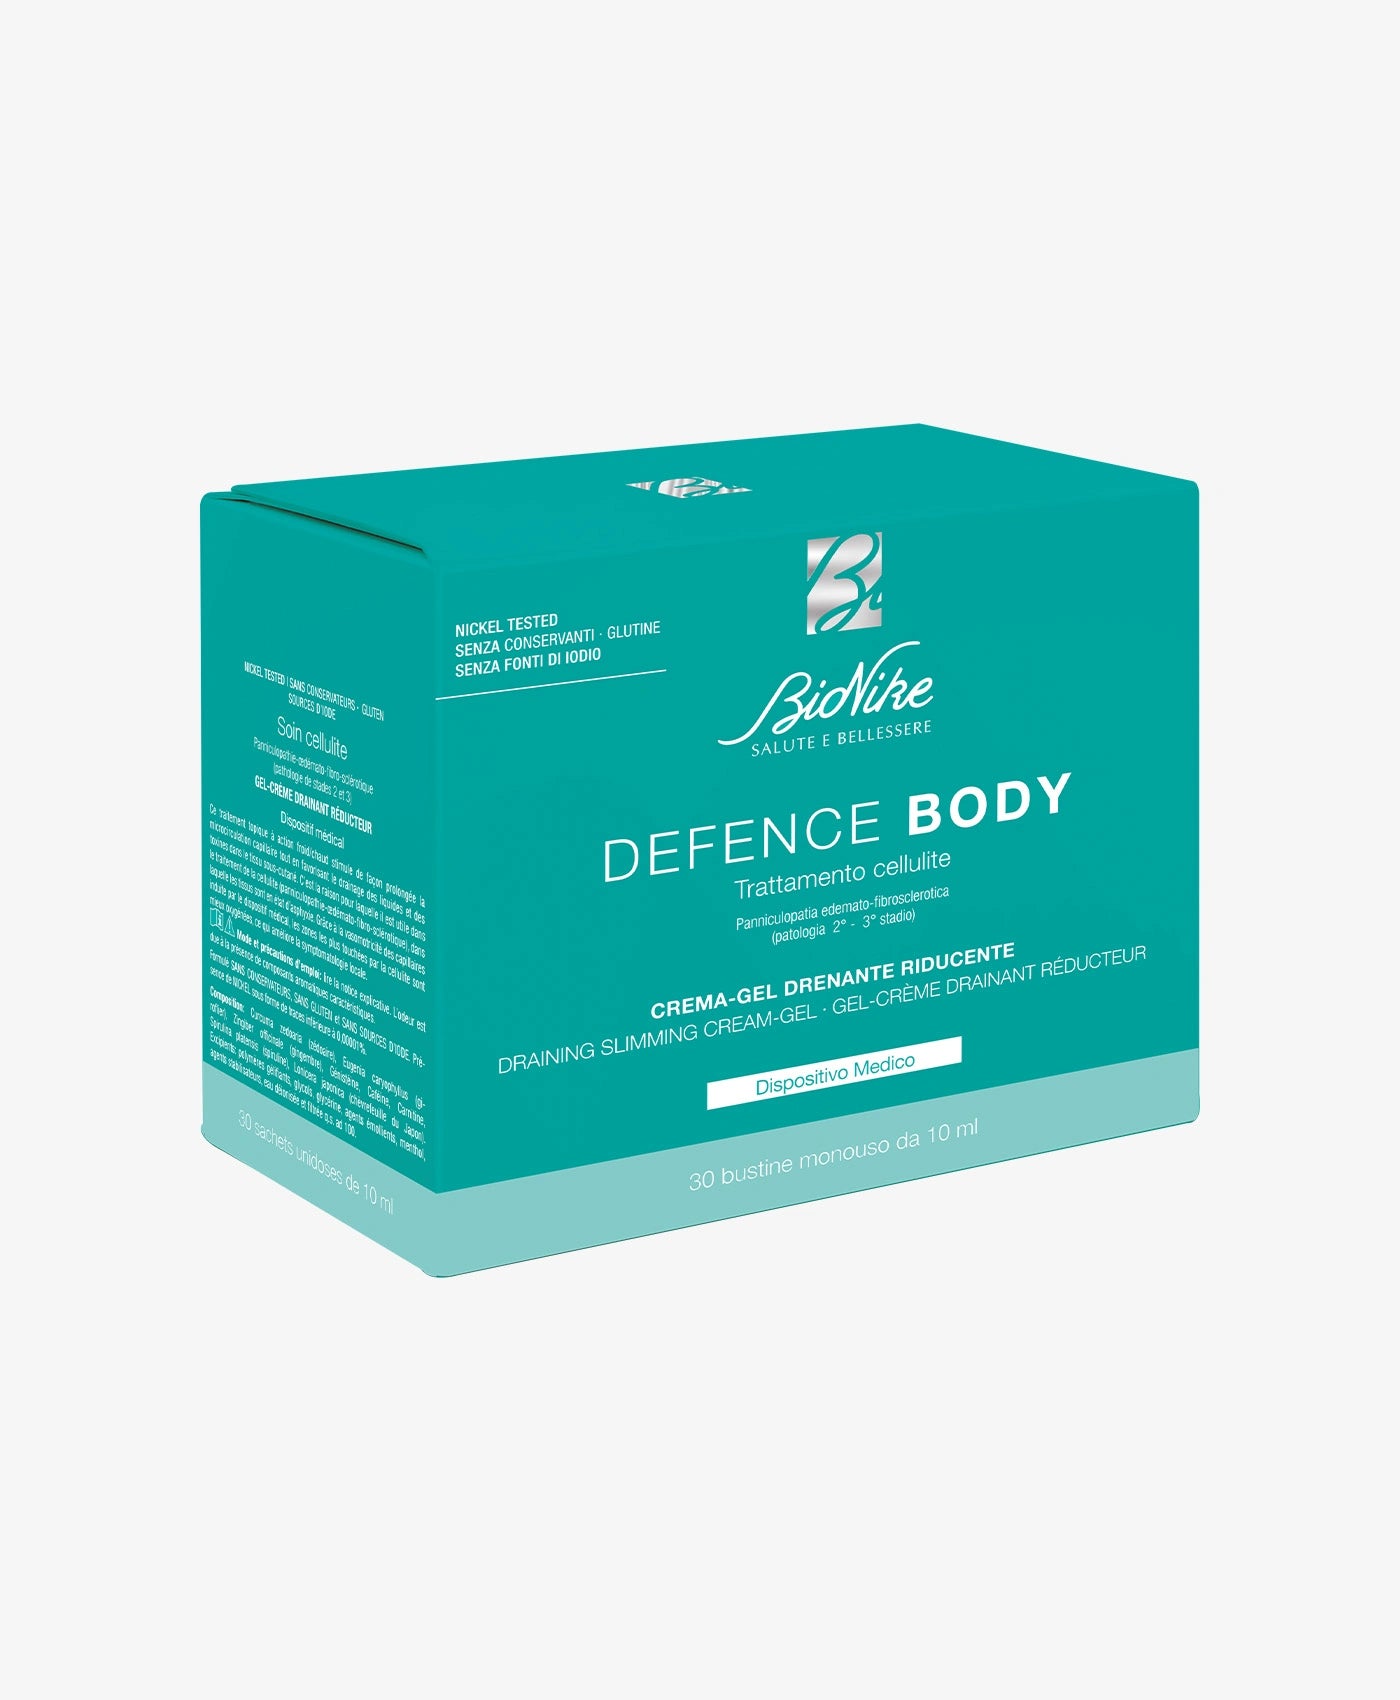 Bionike Defence Body Anticellulite 30 Buste - bionike defence body trattamento cellulite 30 buste